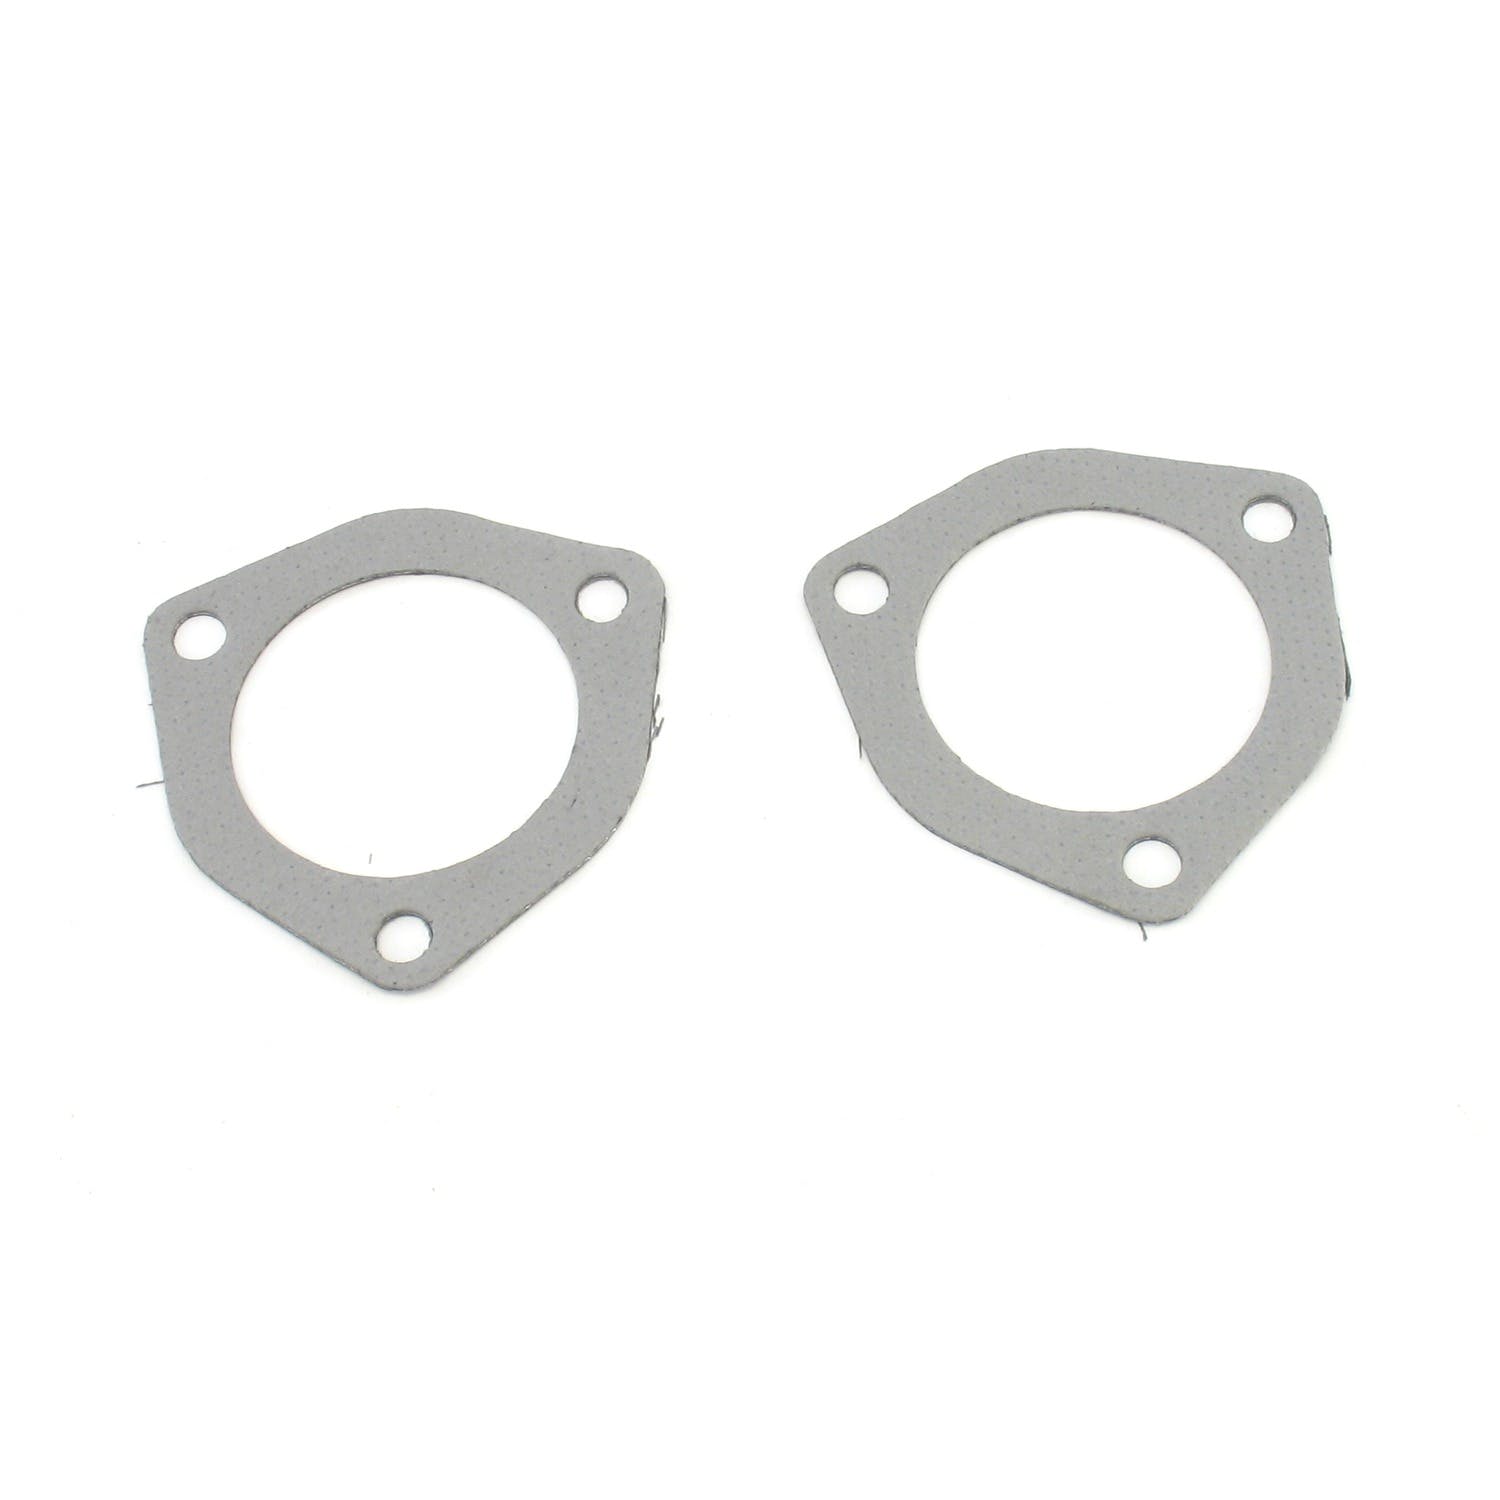 Patriot Exhaust H7938 2 1/2 inch Collector Gasket Universal Pair